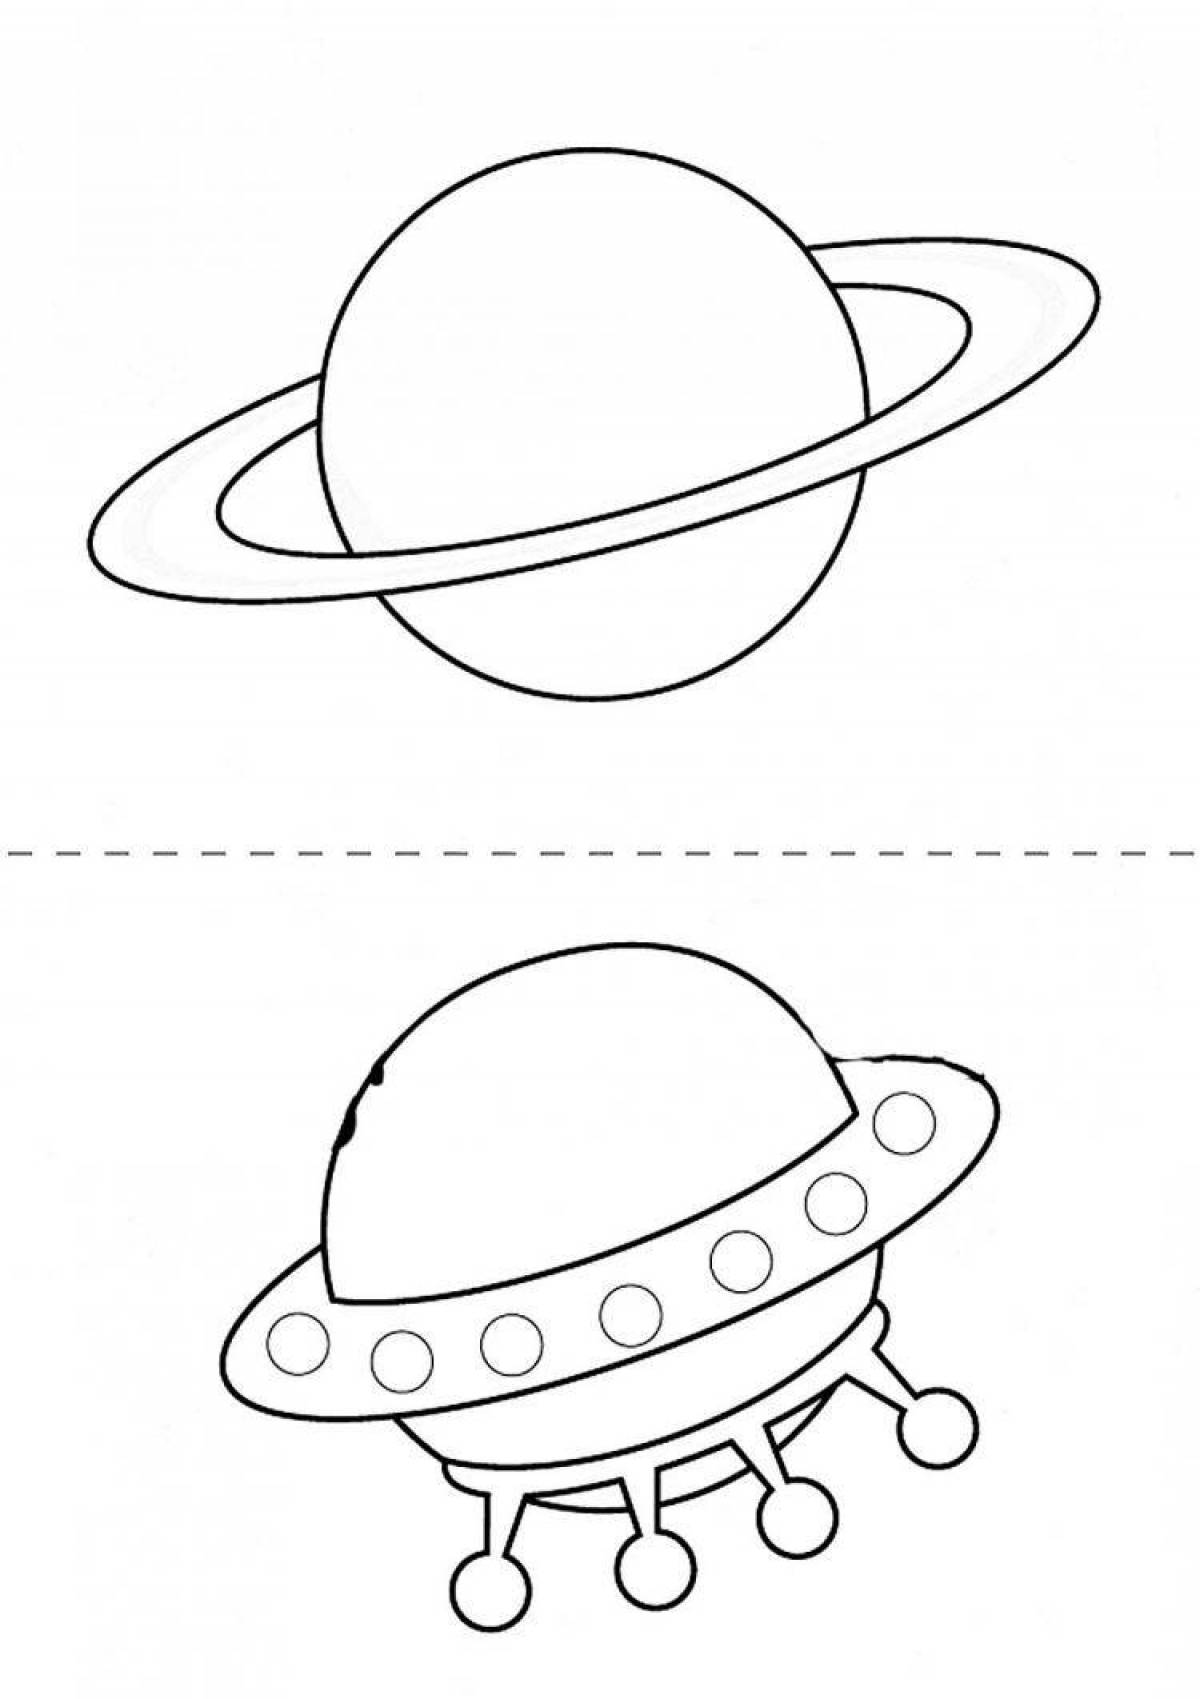 Adorable flying saucer coloring page